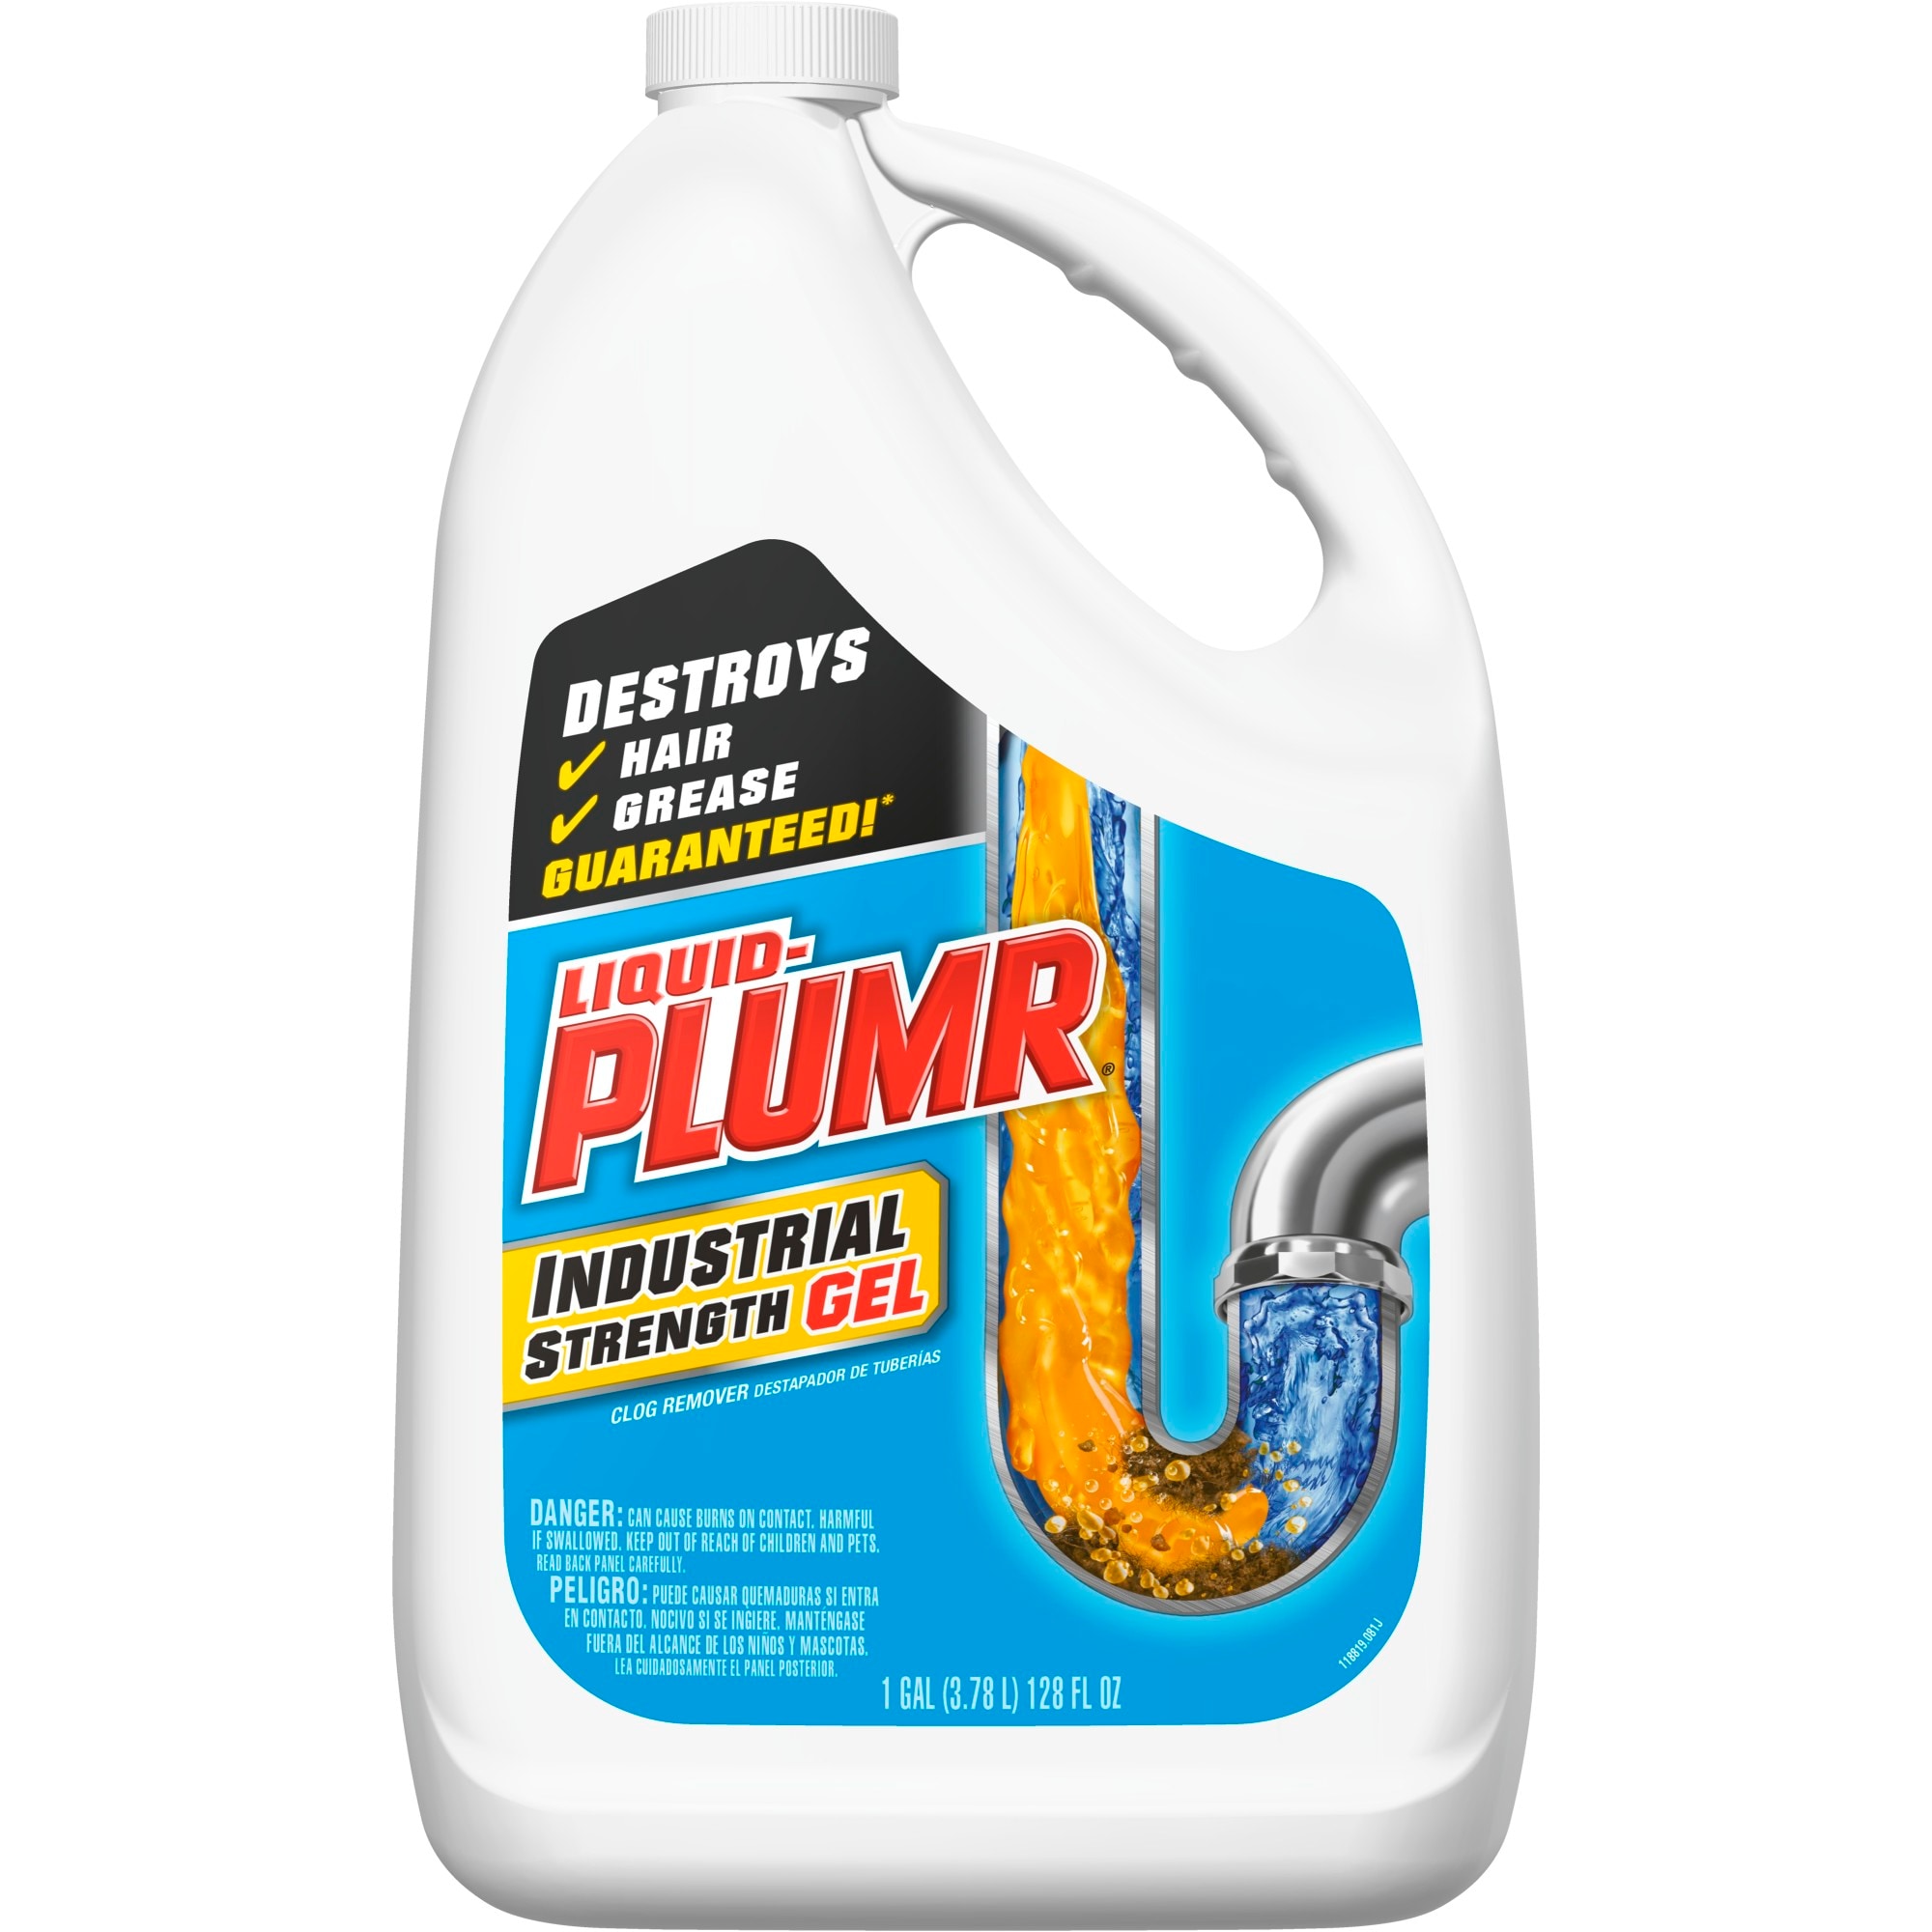 Liquid-Plumr vs. Drano (Which Drain Cleaner Is Better?) - Prudent Reviews